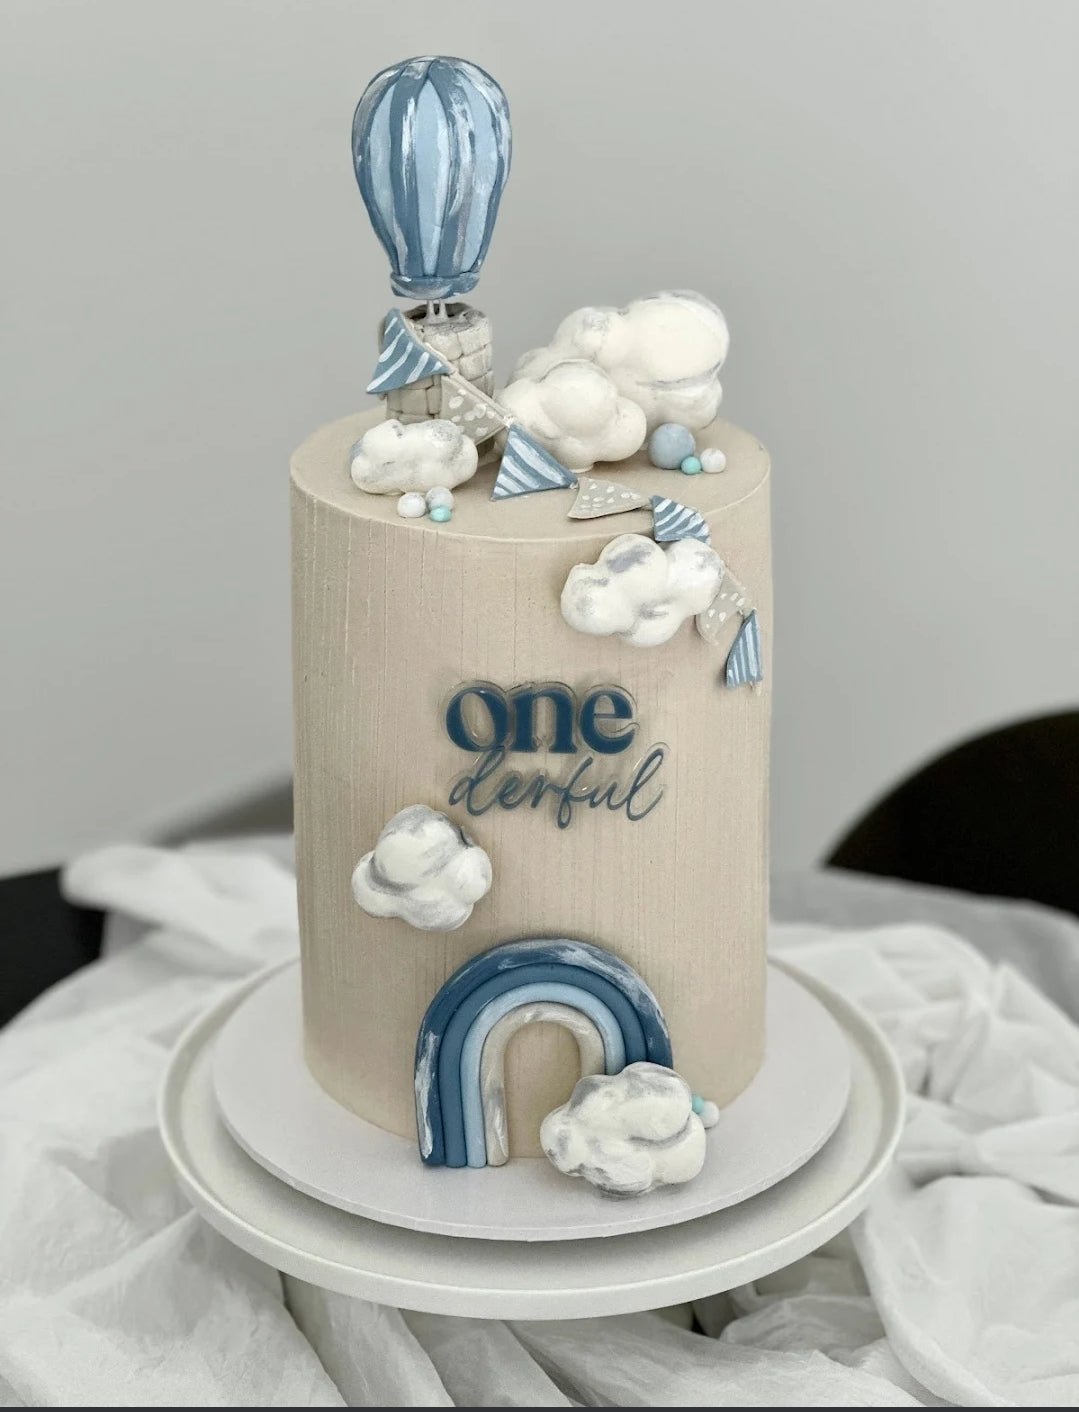 ONEderful Cake Fropper